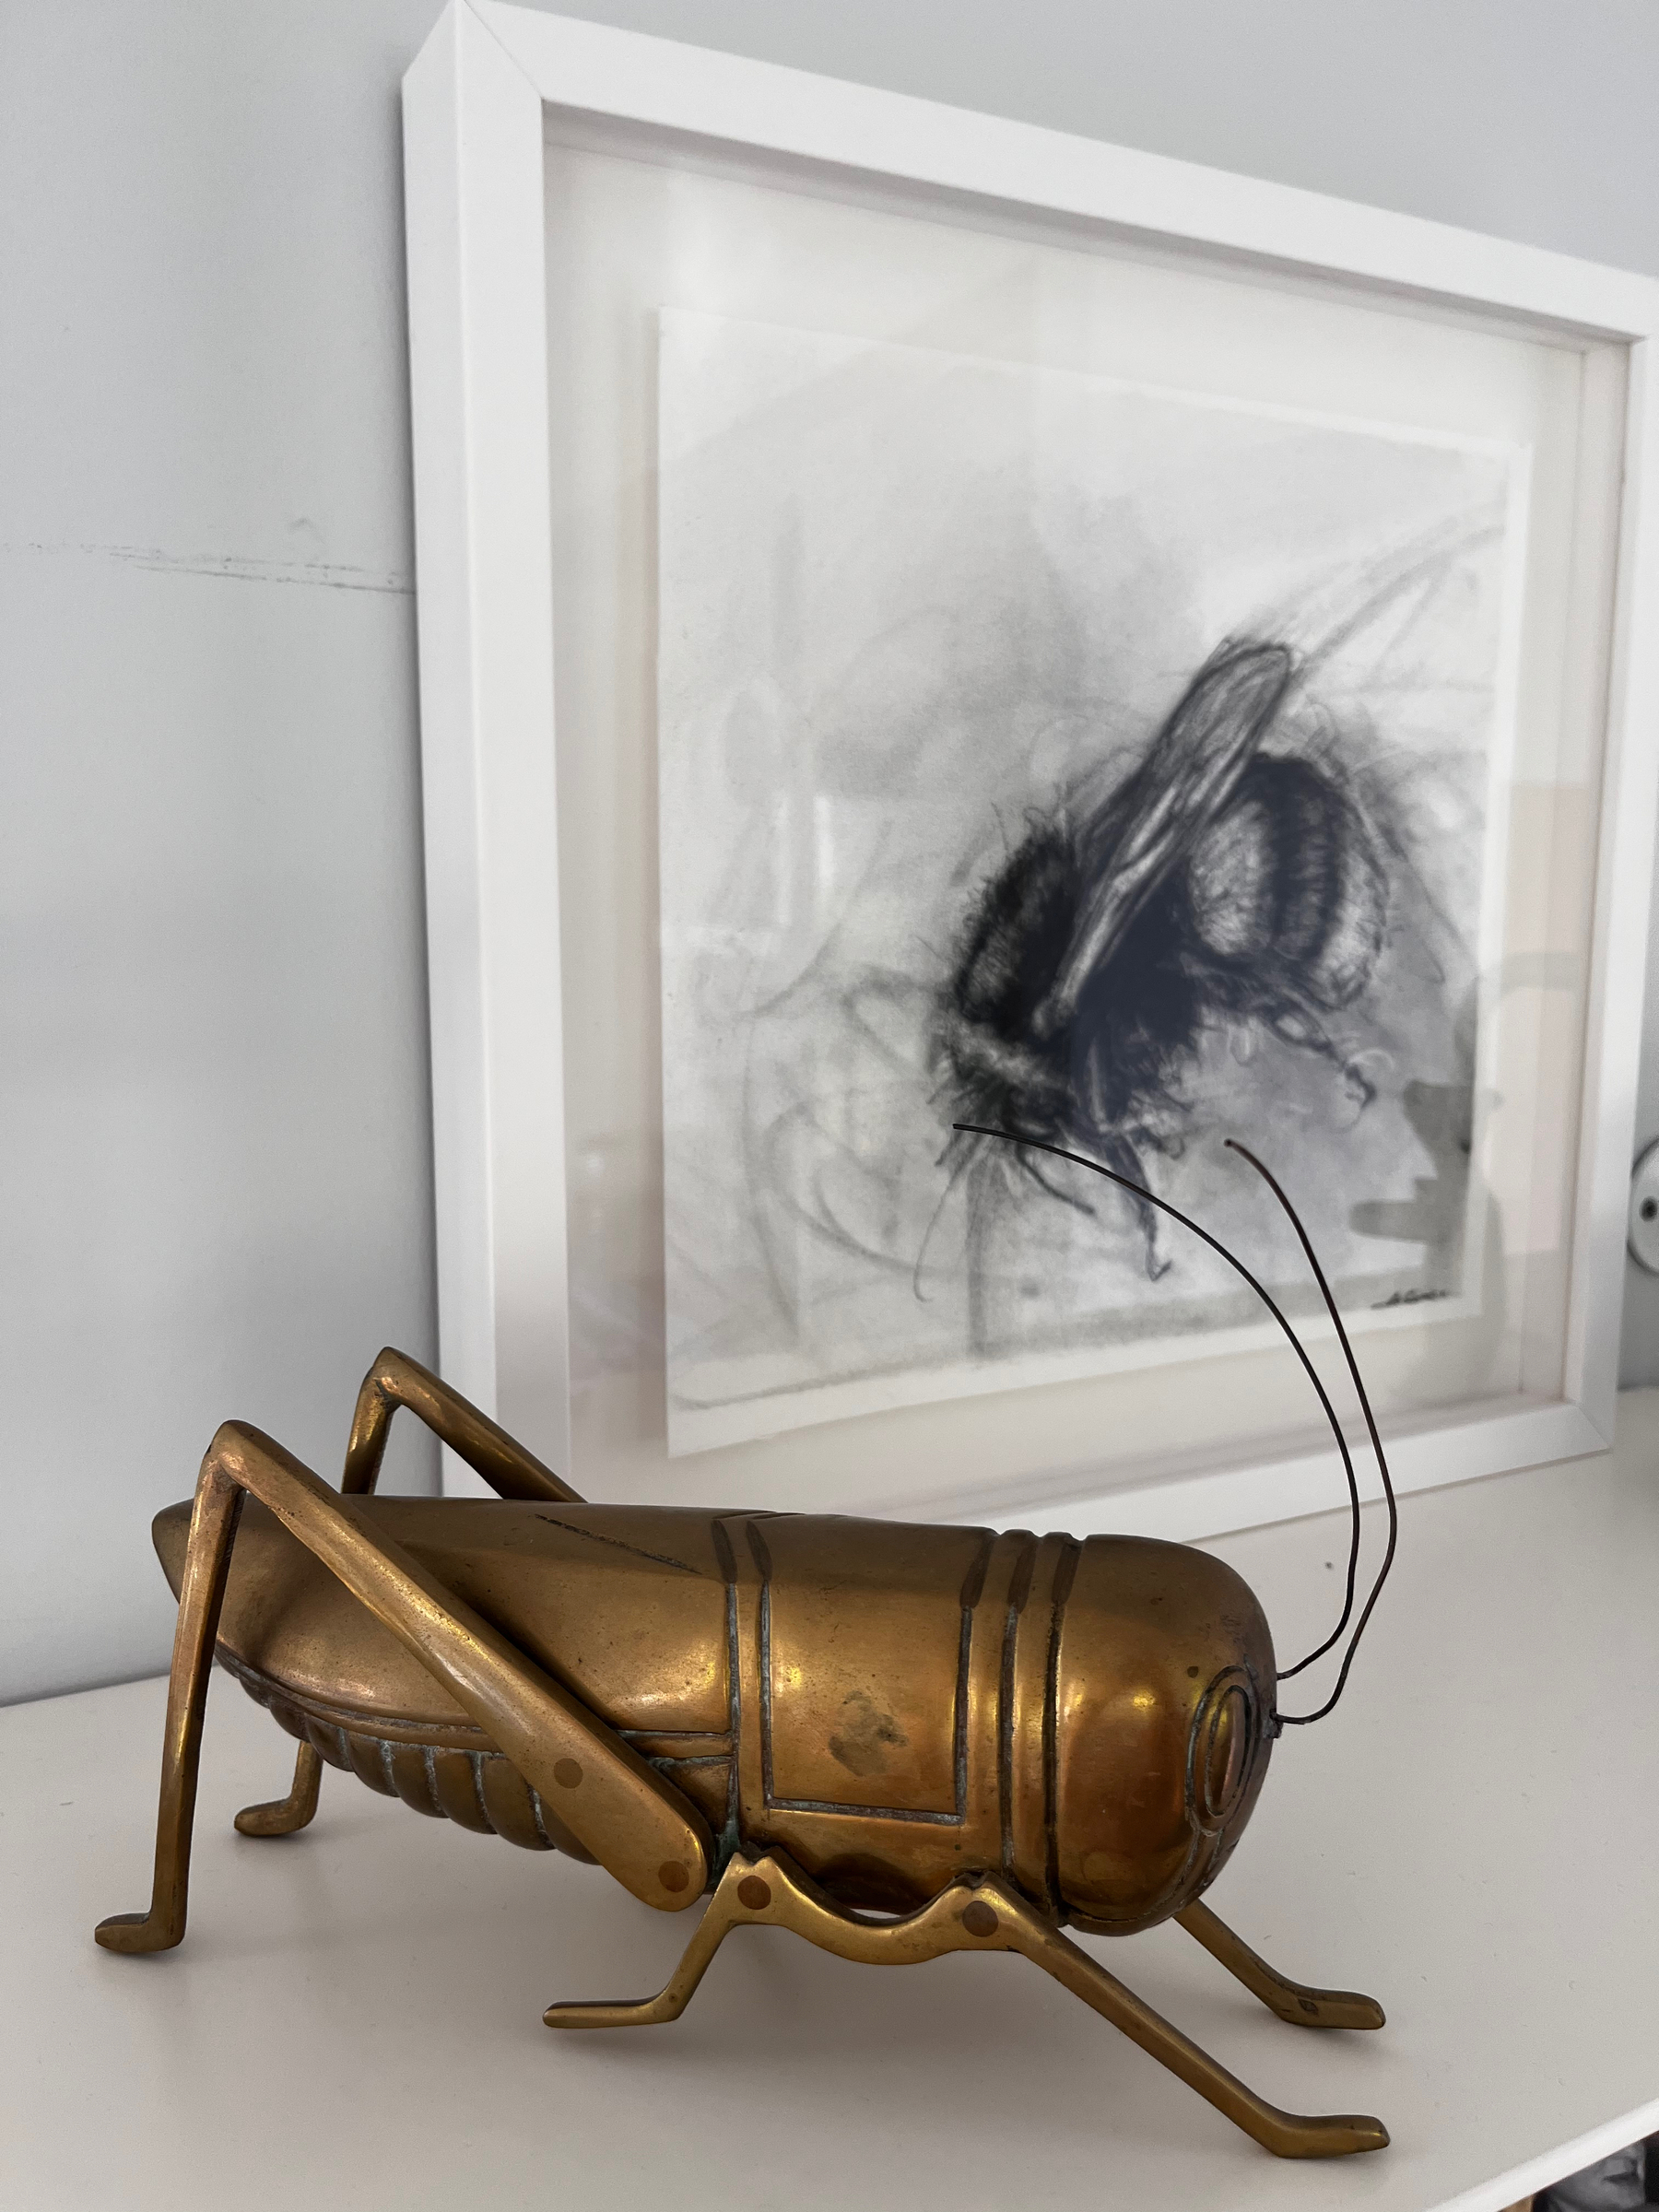 A model of a grasshopper in front of a charcoal drawing of a bumblebee